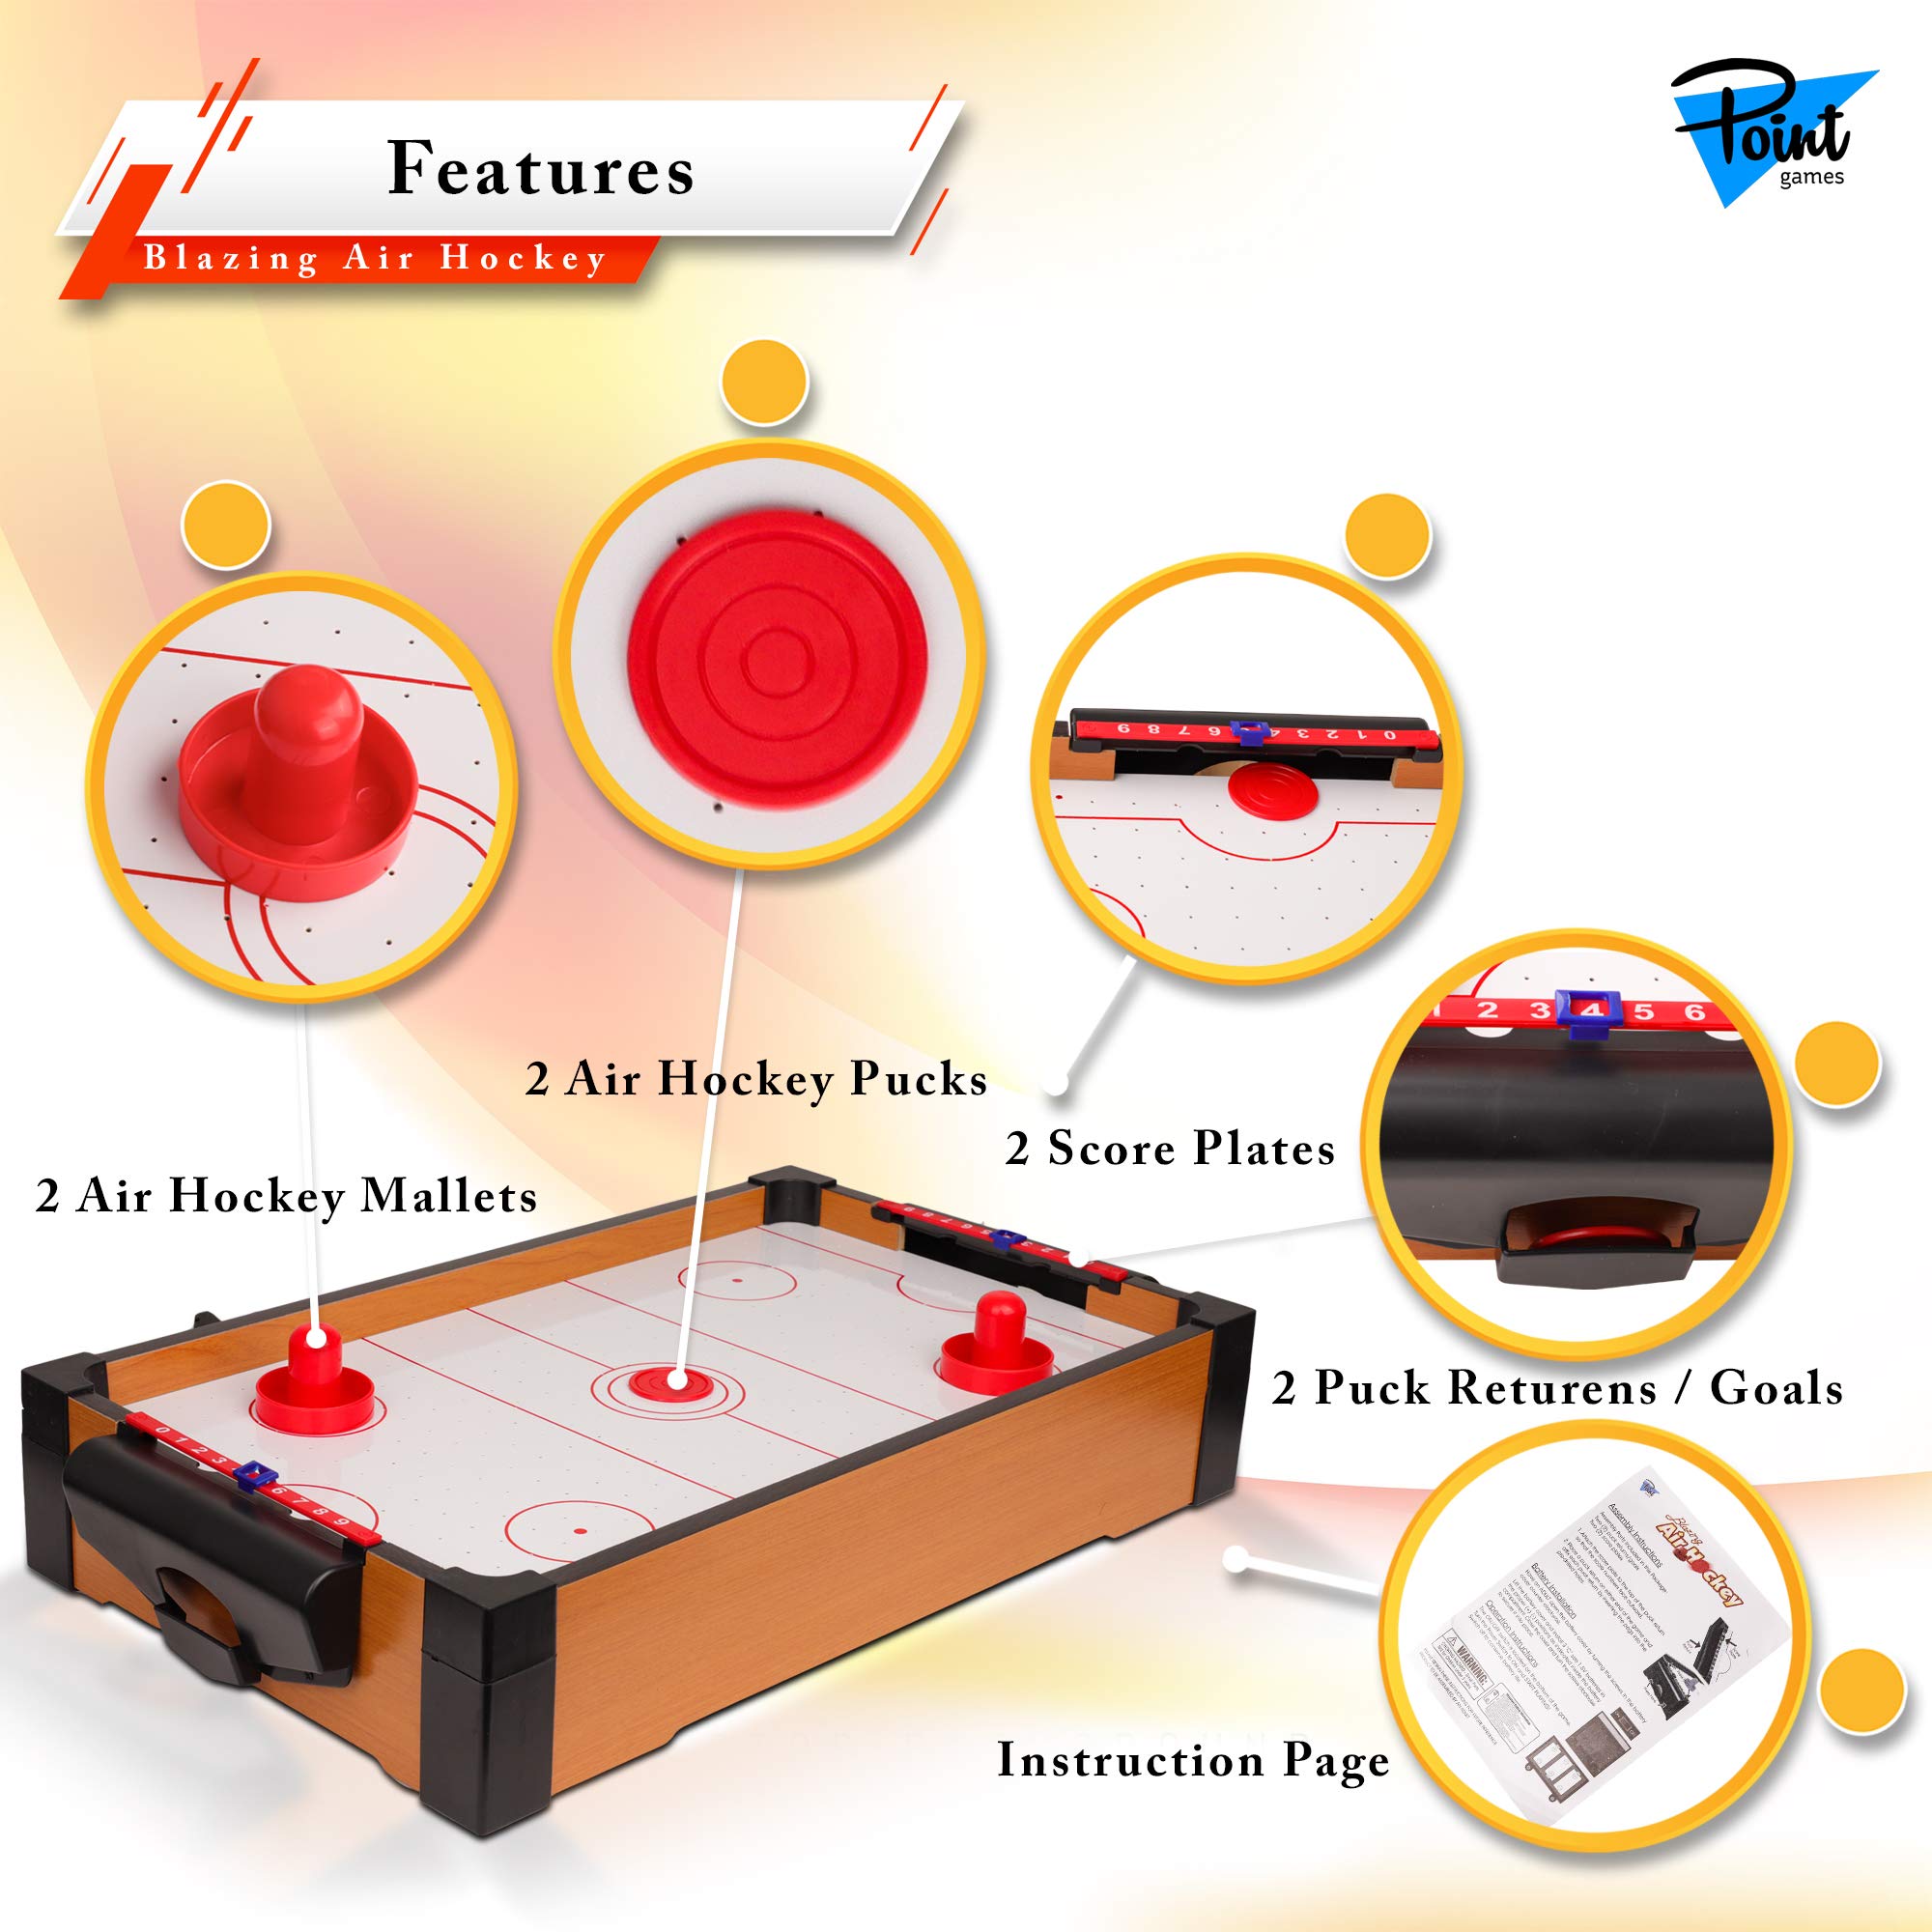 Point Games Mini Air Hockey Table for Kids - Hockey Table Game - Arcade & Table Games - Air Hockey Pucks and Paddles - Portable Sport Hockey for Boys and Girls - image 3 of 6